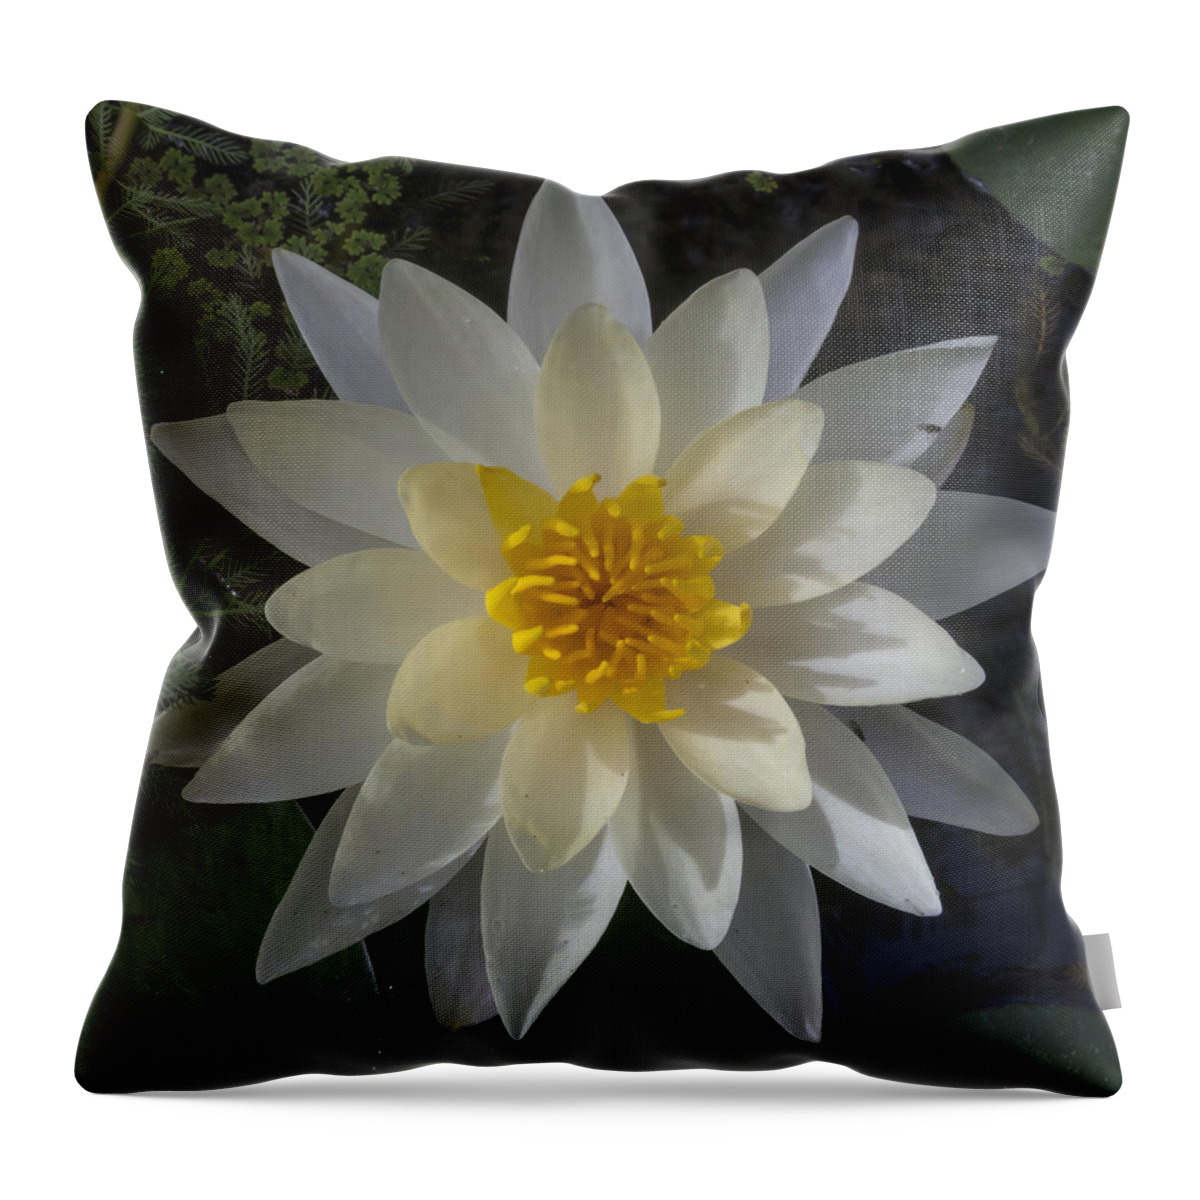 Flower Throw Pillow featuring the photograph Tenderly by Bruce Frye